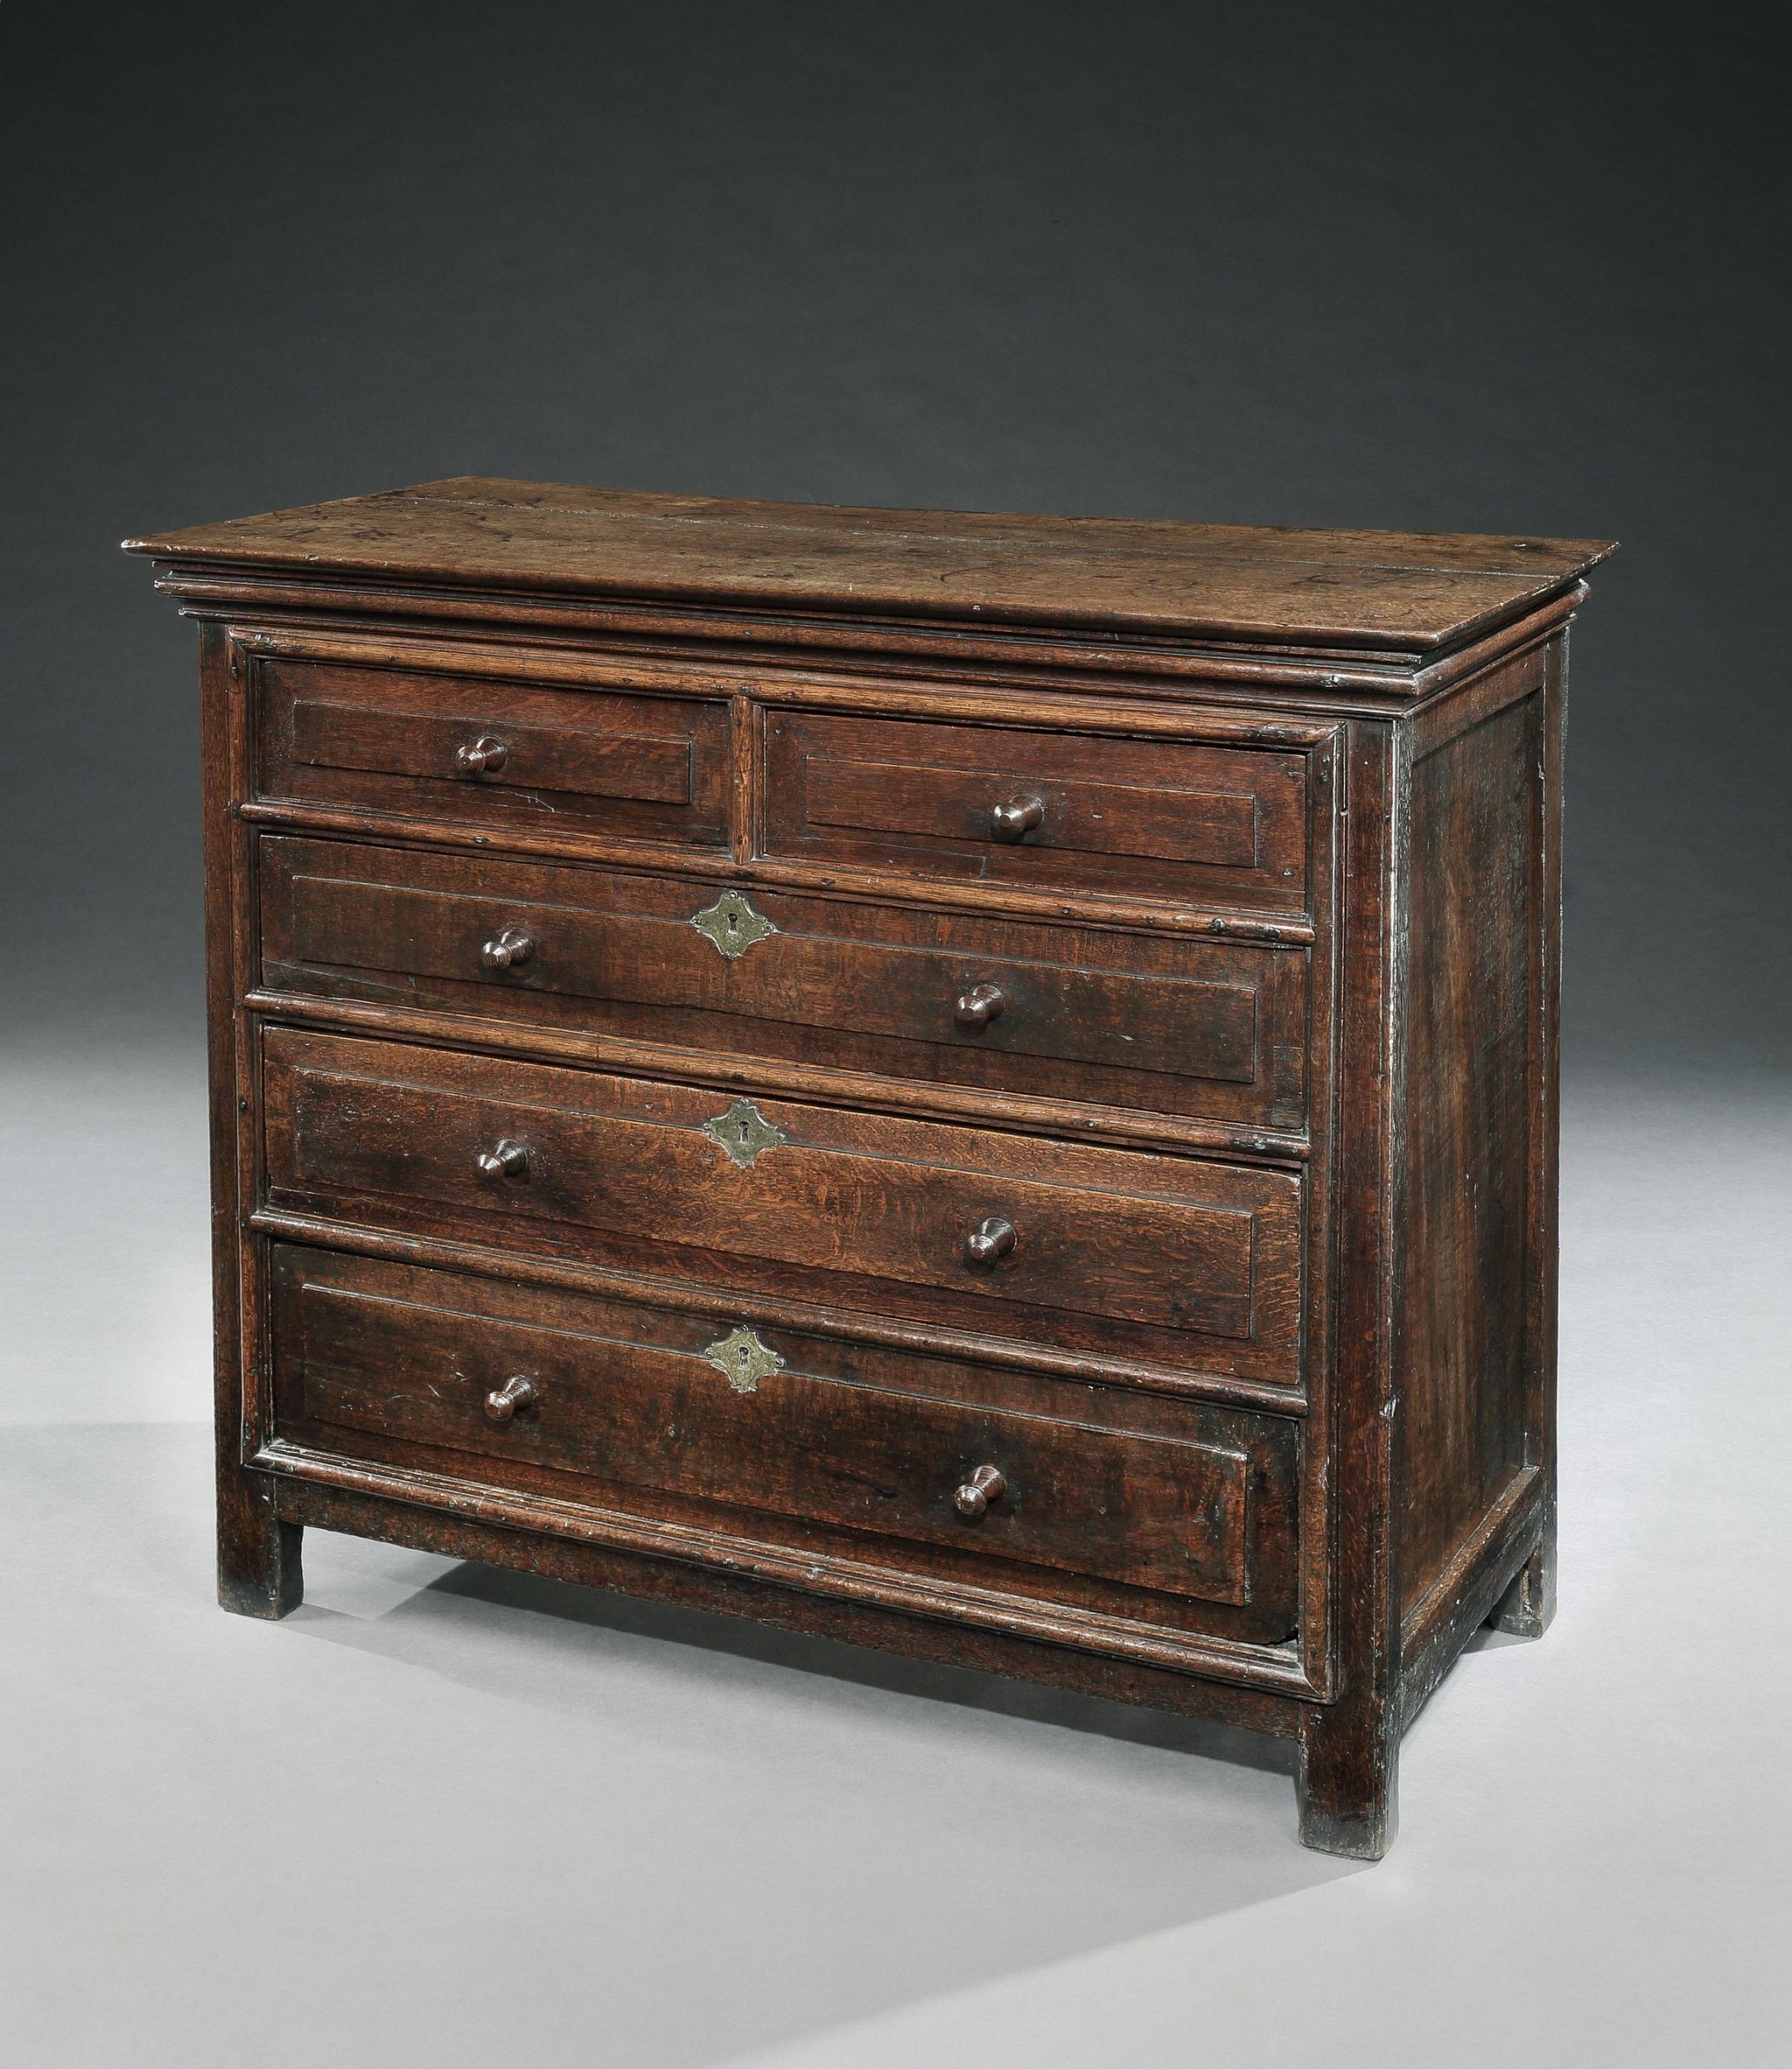 A Rare Puritan Period Chest of Five Drawers